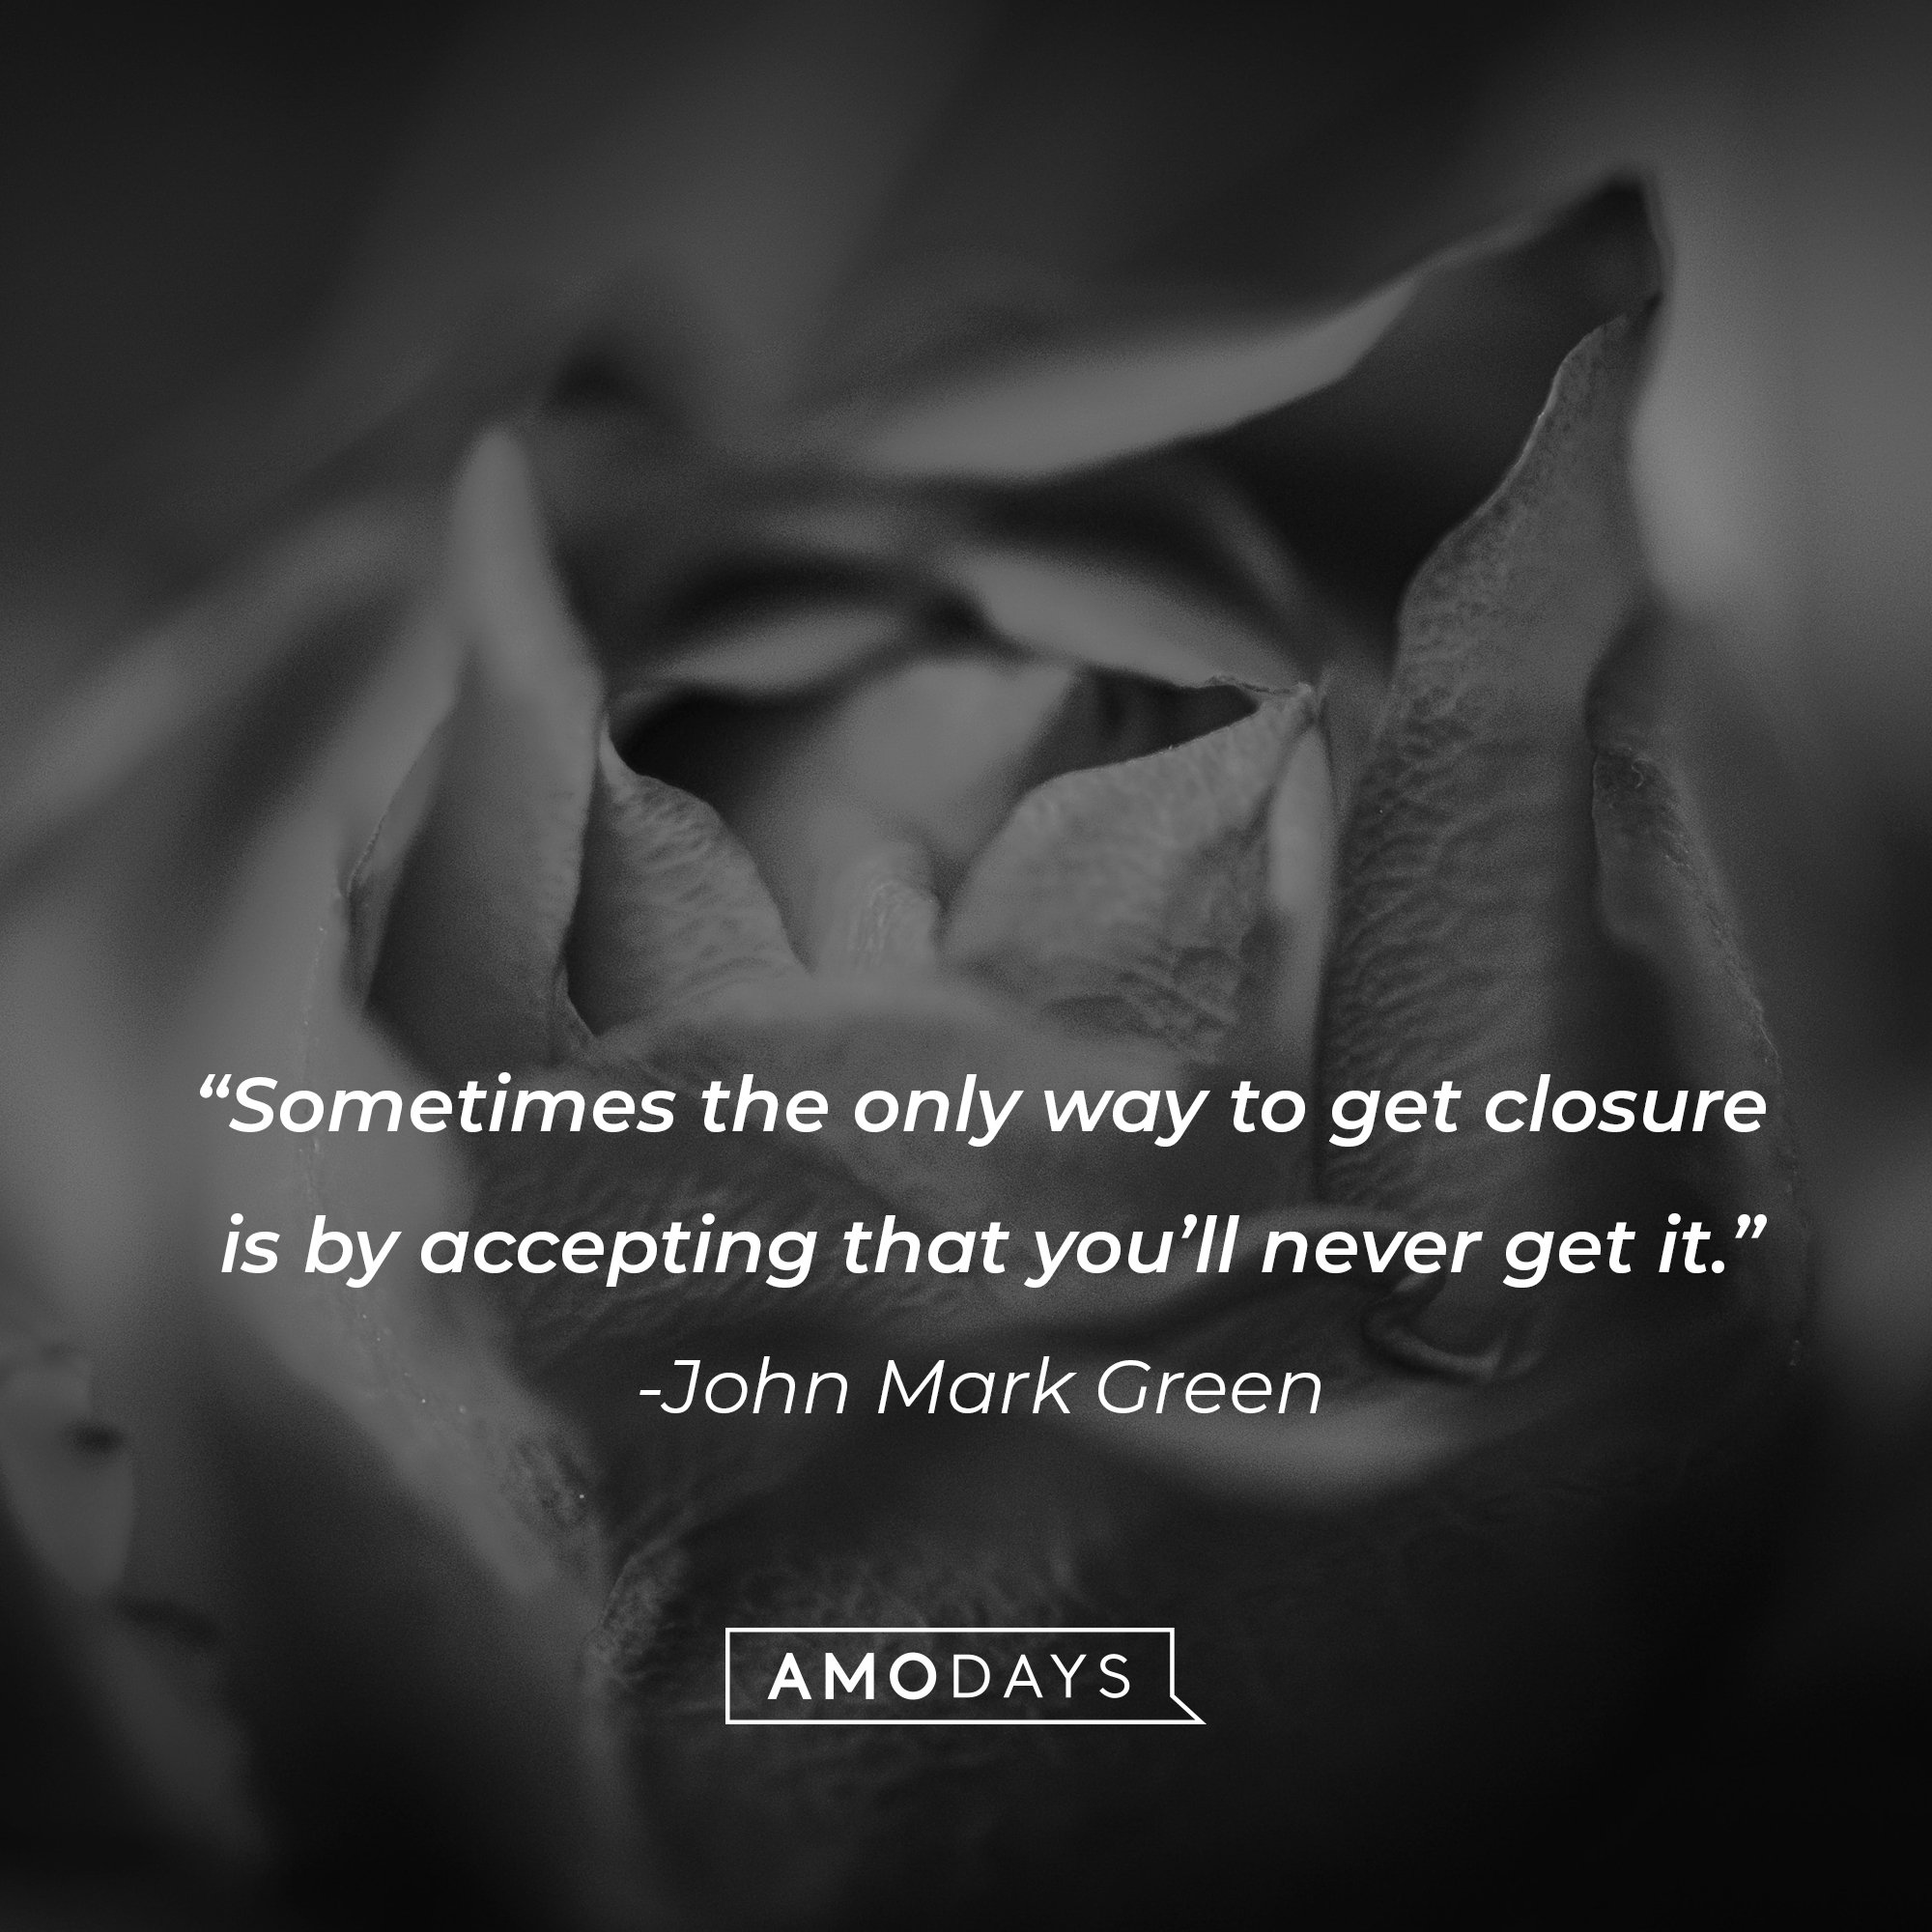 John Mark Green's quote: "Sometimes the only way to get closure is by accepting that you'll never get it." | Image: AmoDays